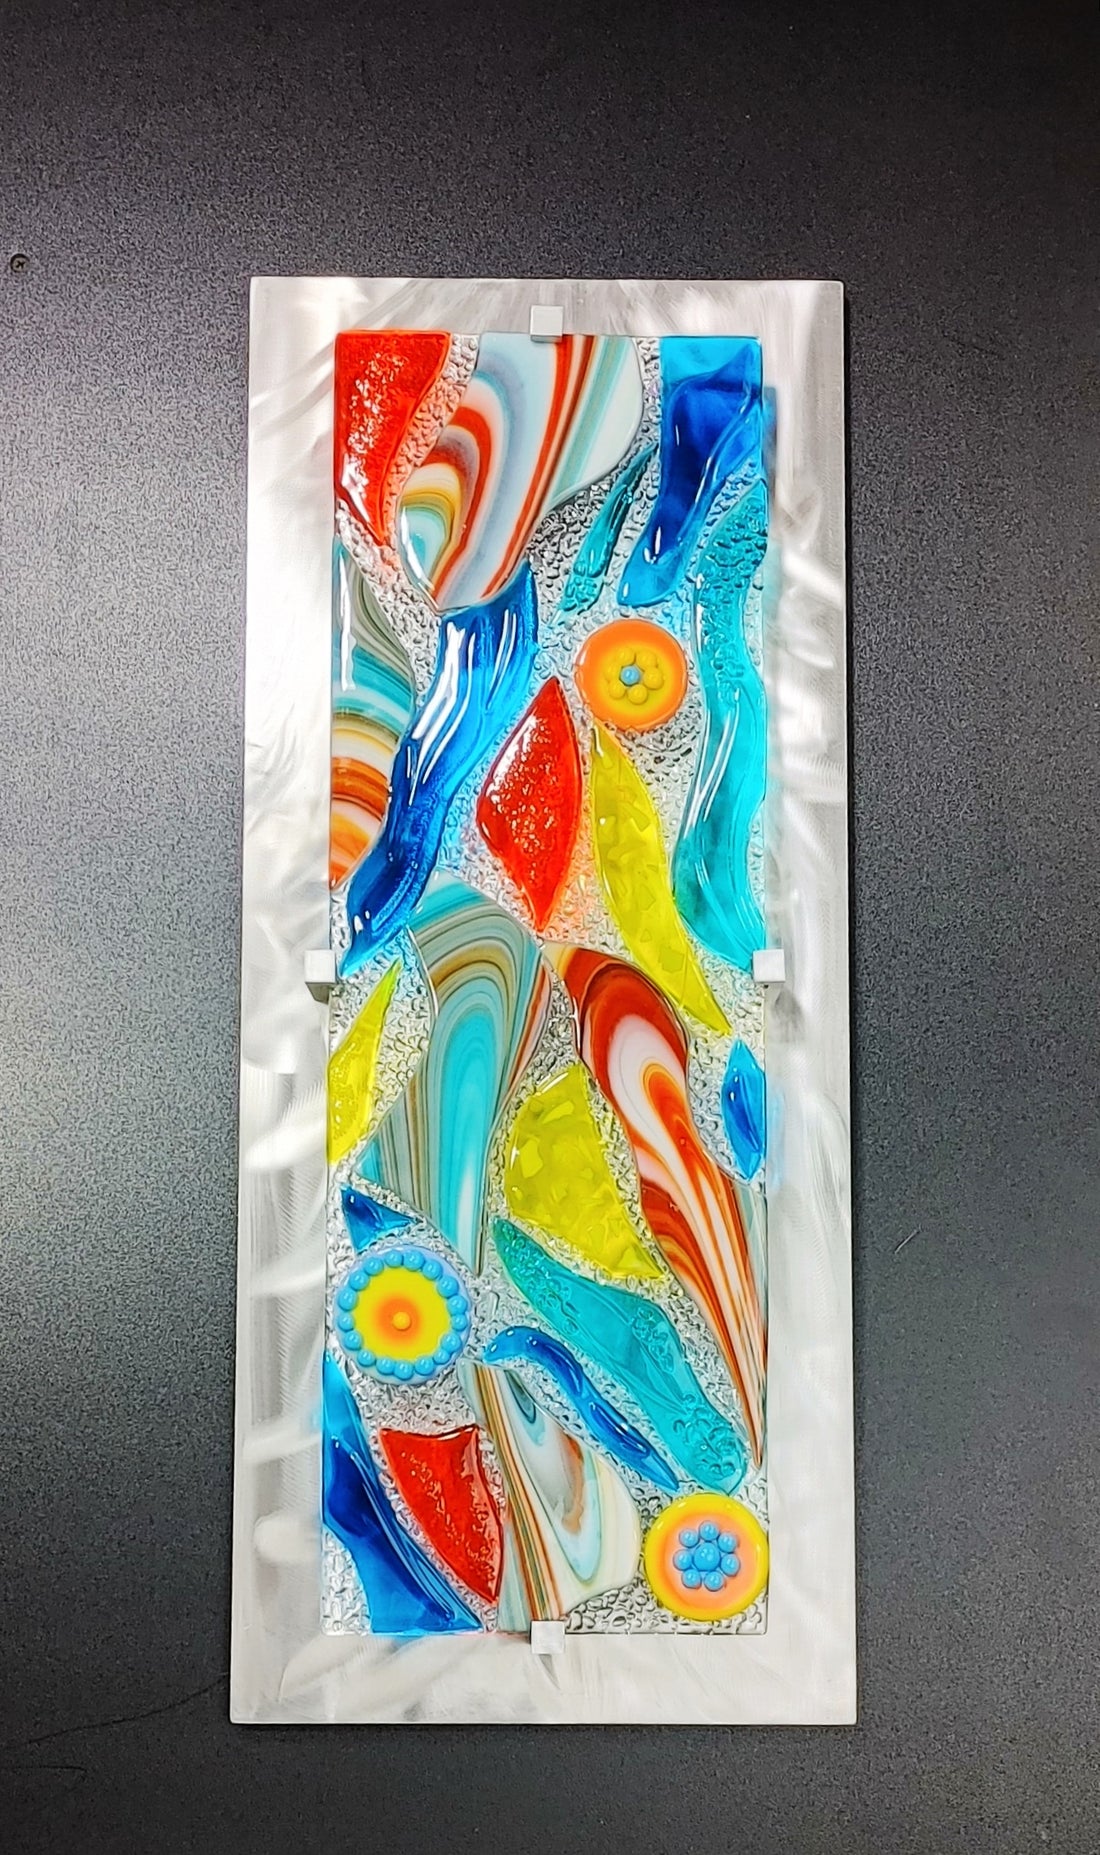 Glass Wall Art Panel Fused Stained Glass Art Southwest Design. &quot;Mirage&quot;